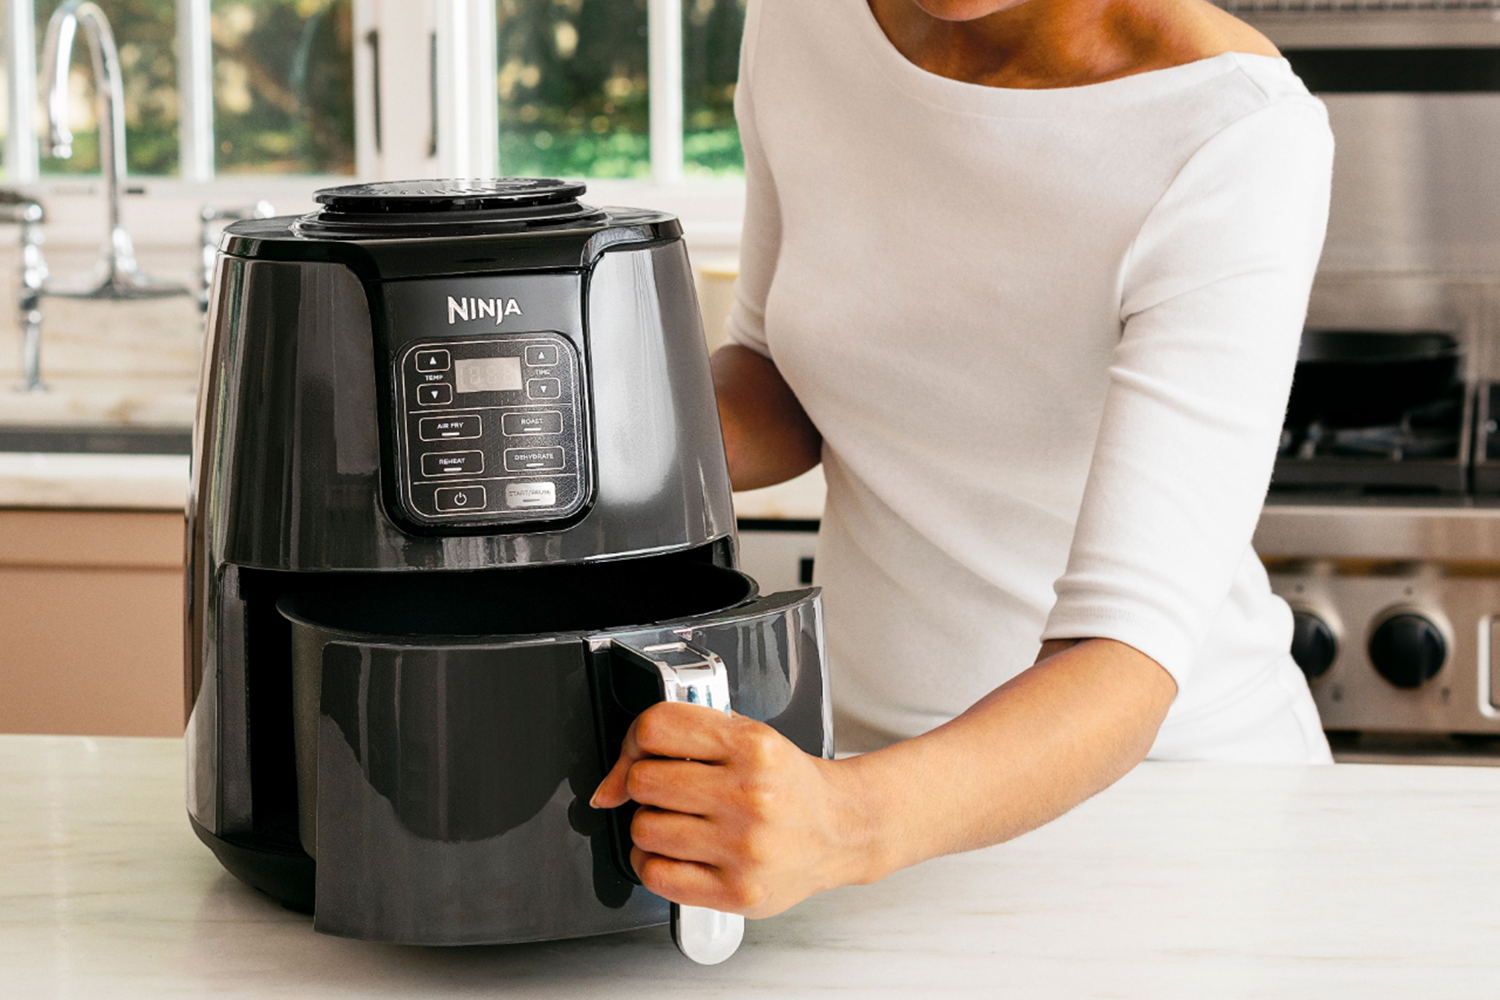 These Are the Best Air Fryer Sales for President's Day Weekend